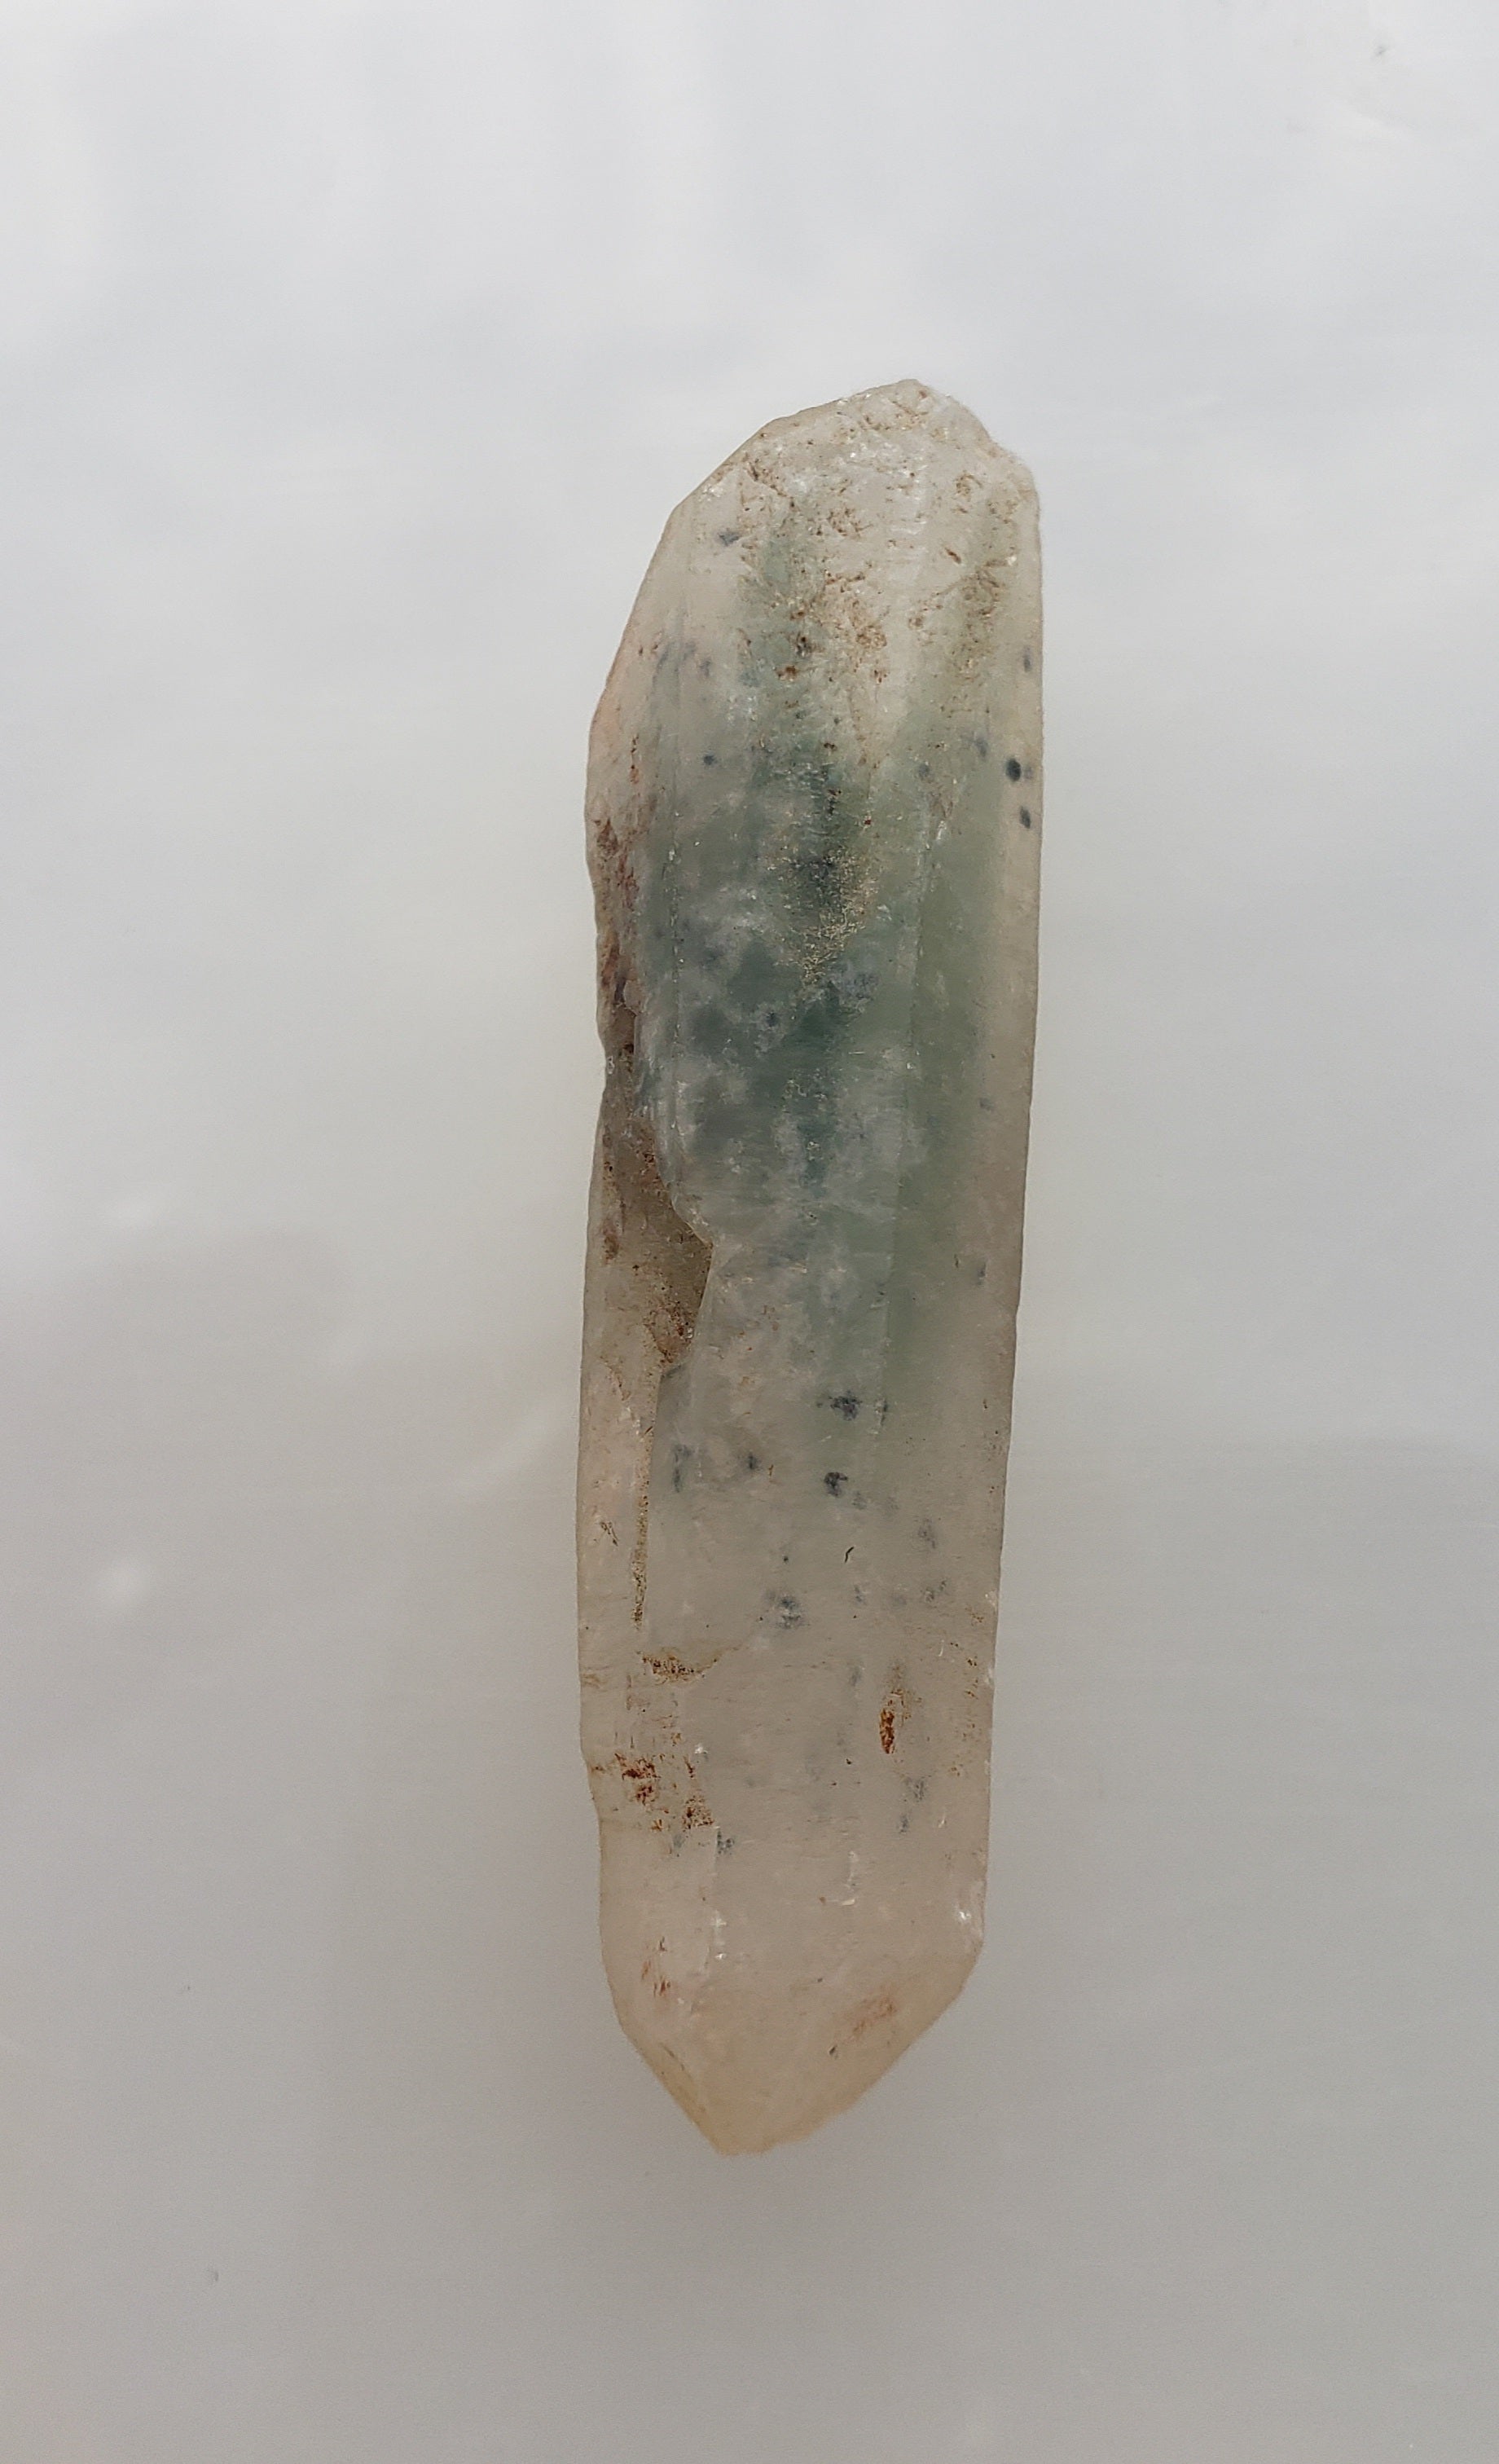 Double terminated quartz point with chlorite inclusions - 12g